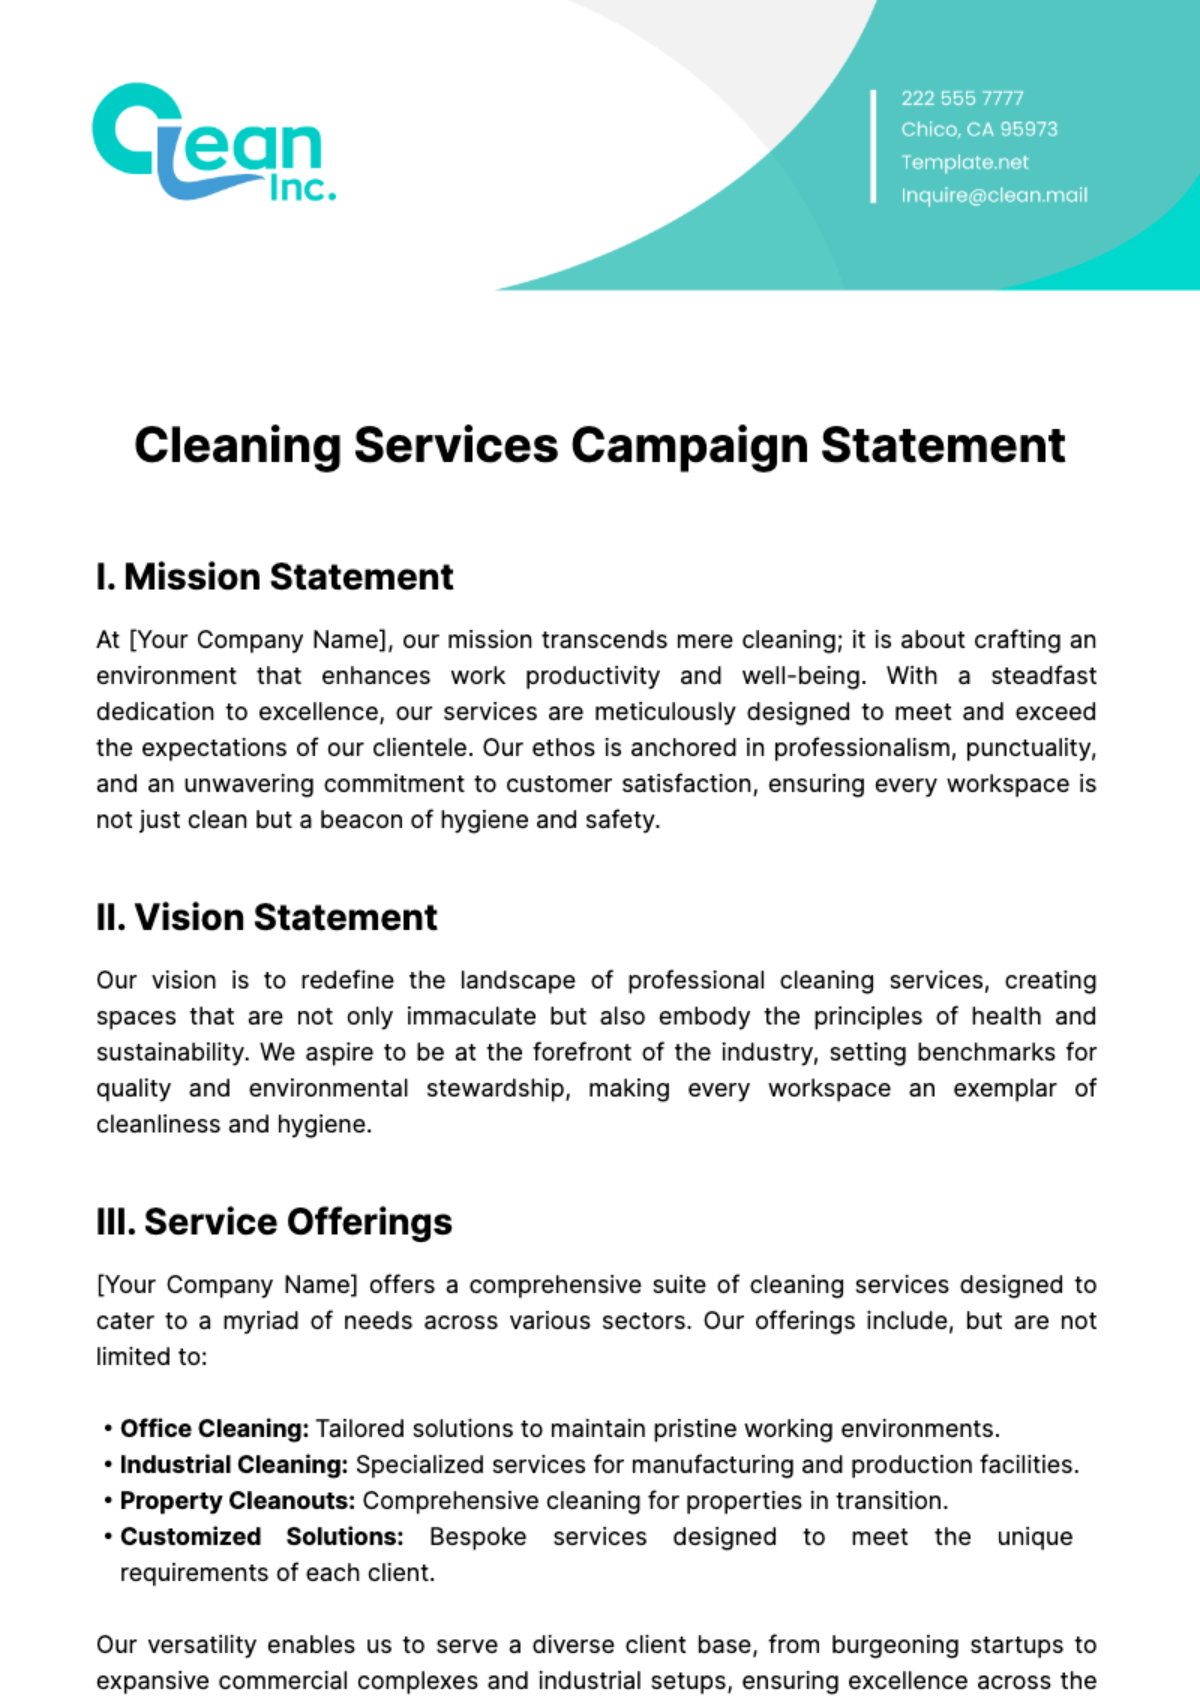 Cleaning Services Campaign Statement Template